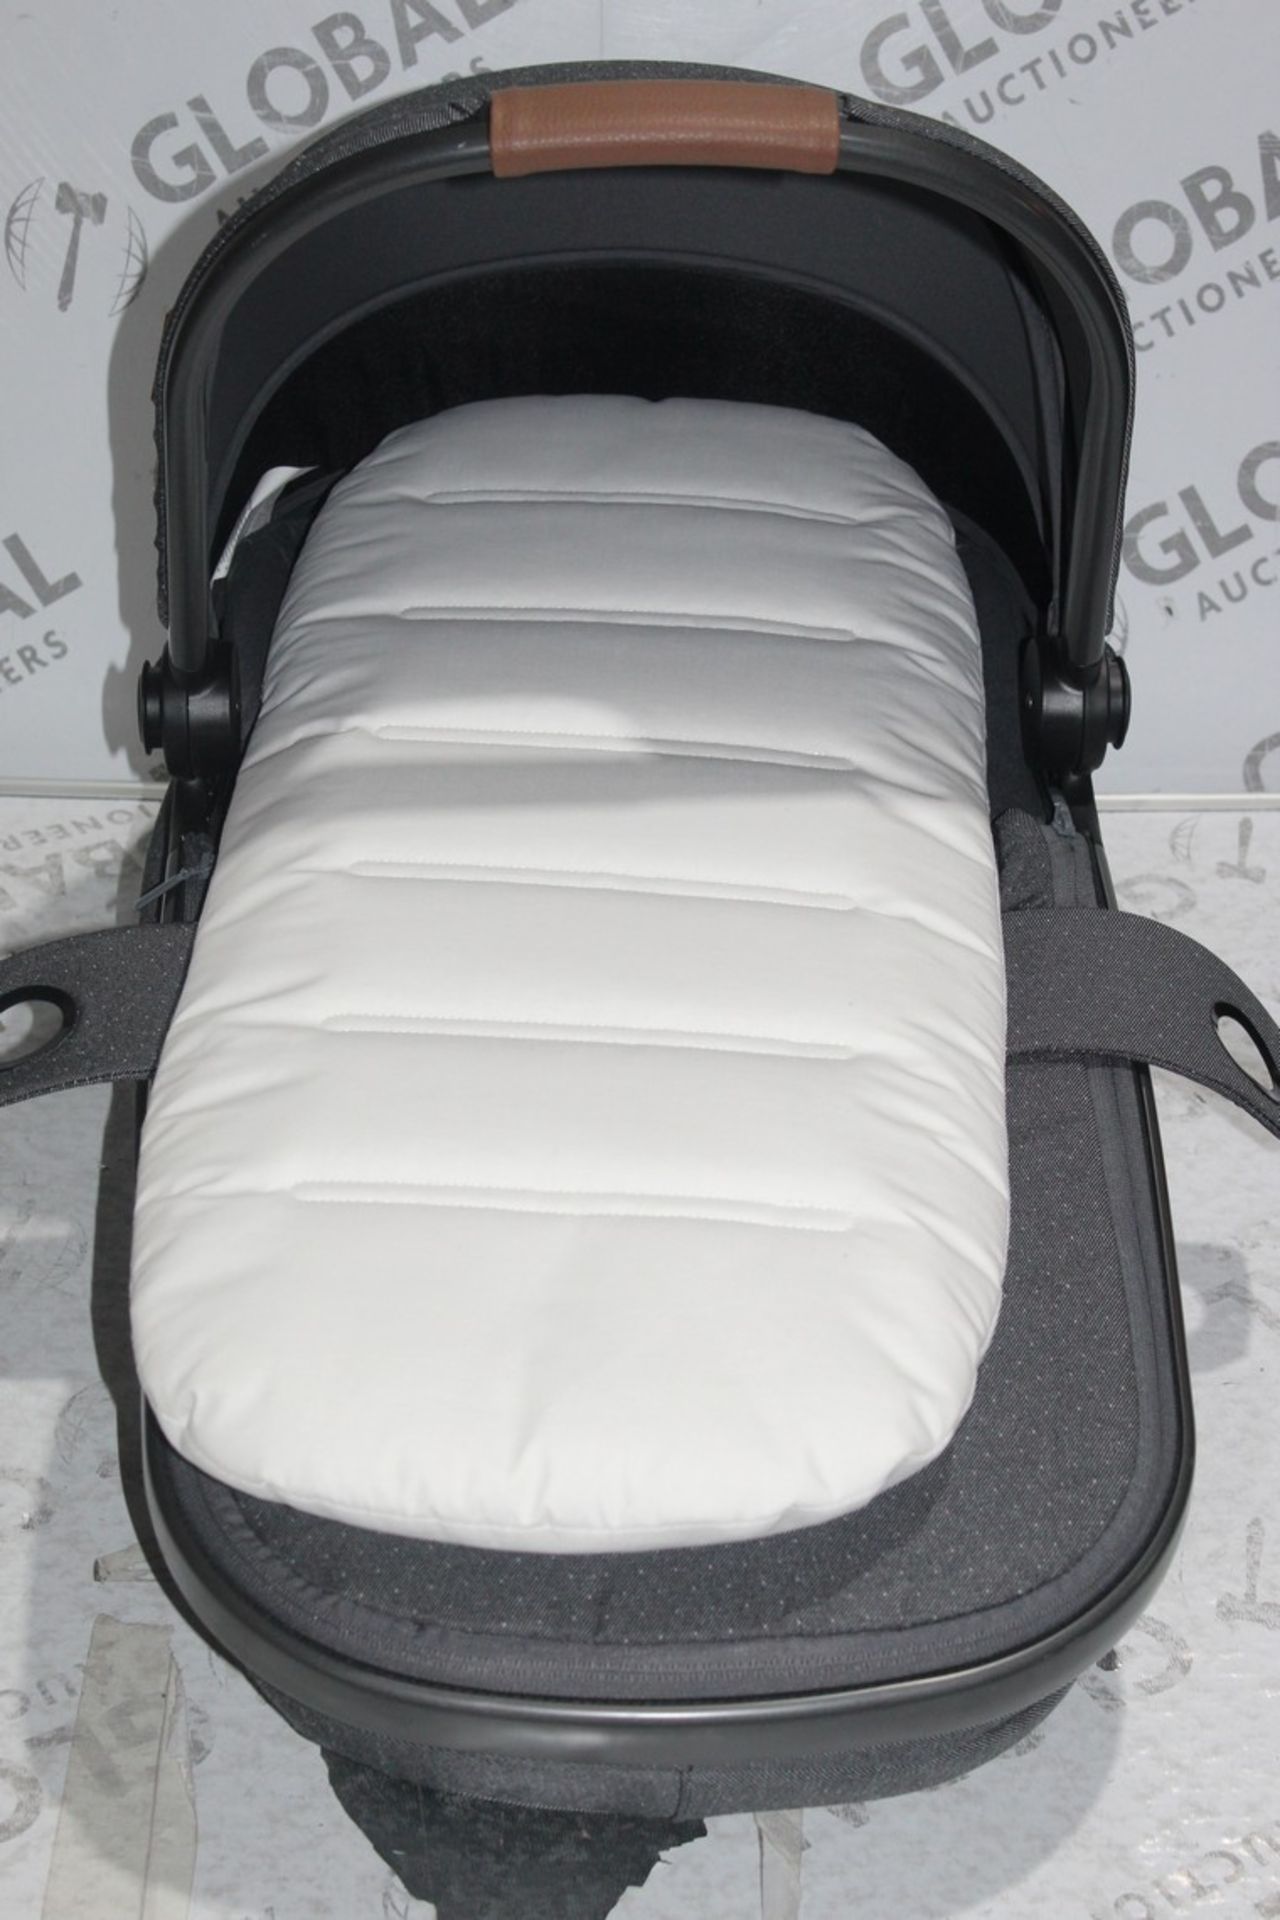 Maxi Cosi Grey Fabric Carry Cot RRP £120 (Public Viewing and Appraisals Available)